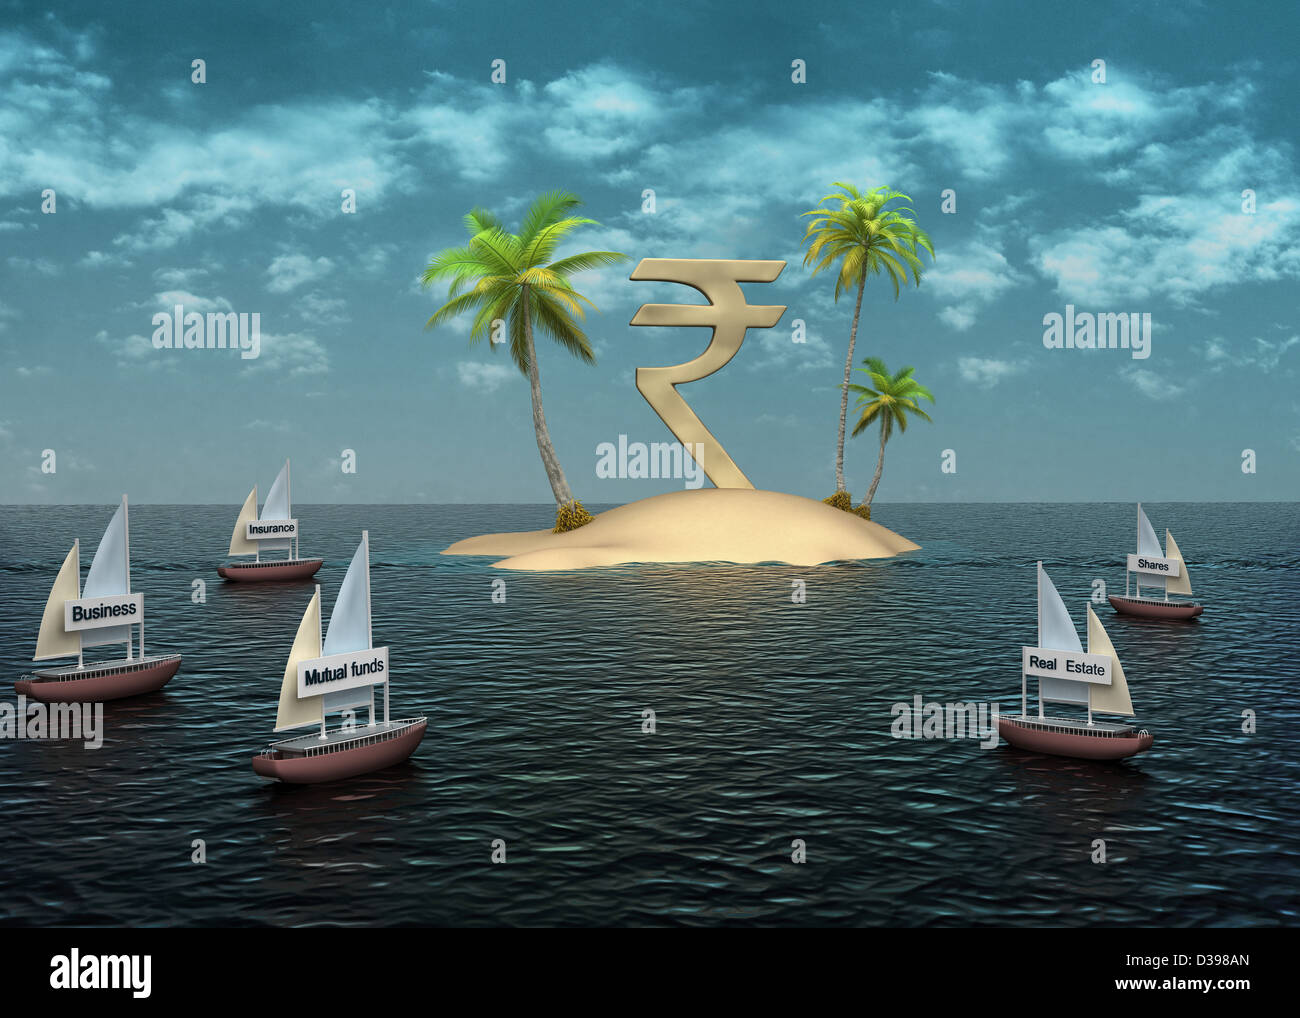 Rupee island surrounded by sailboats representing investment choices Stock Photo